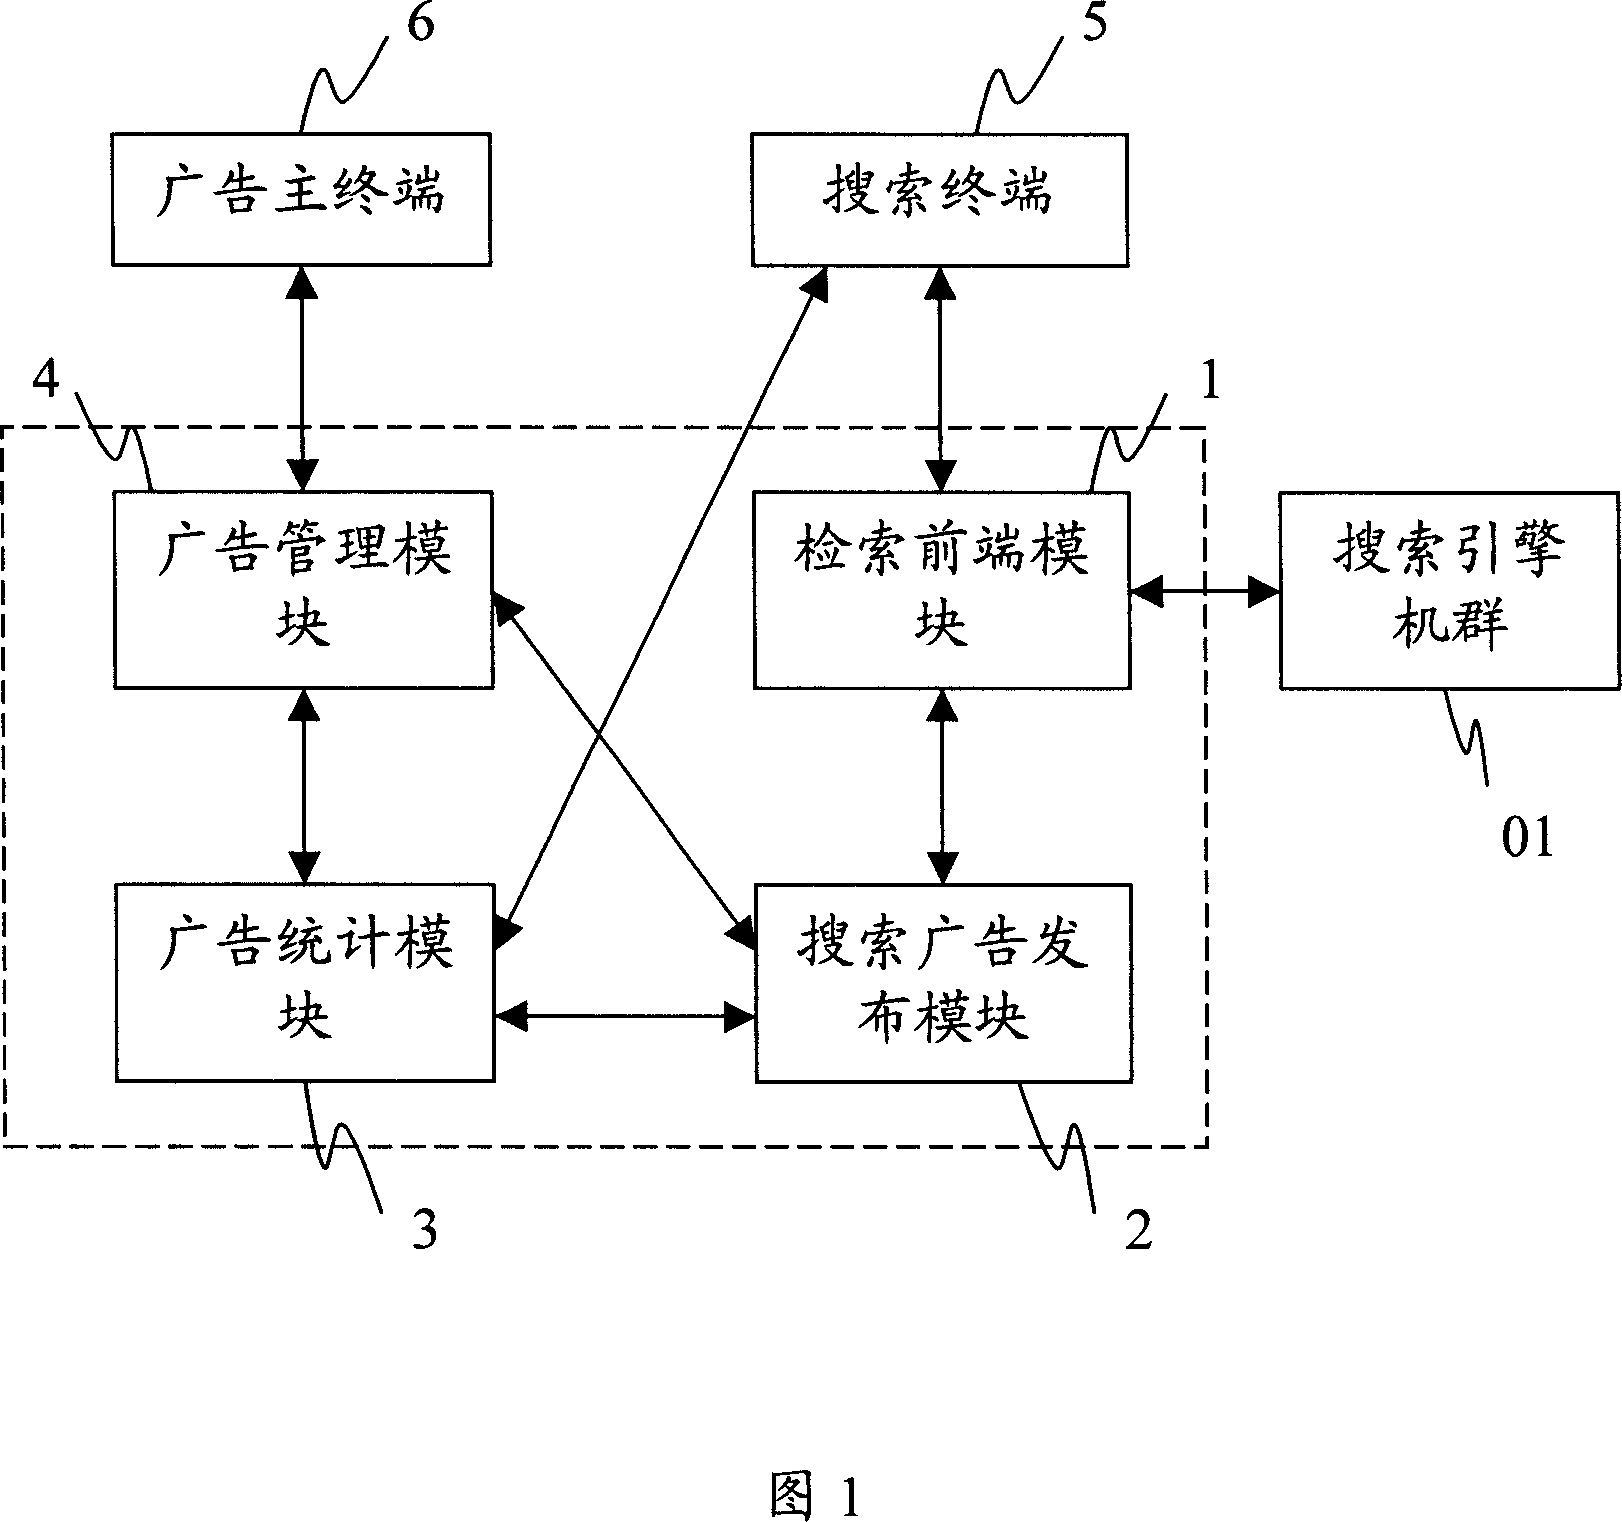 Search advertisement sequencing system and method